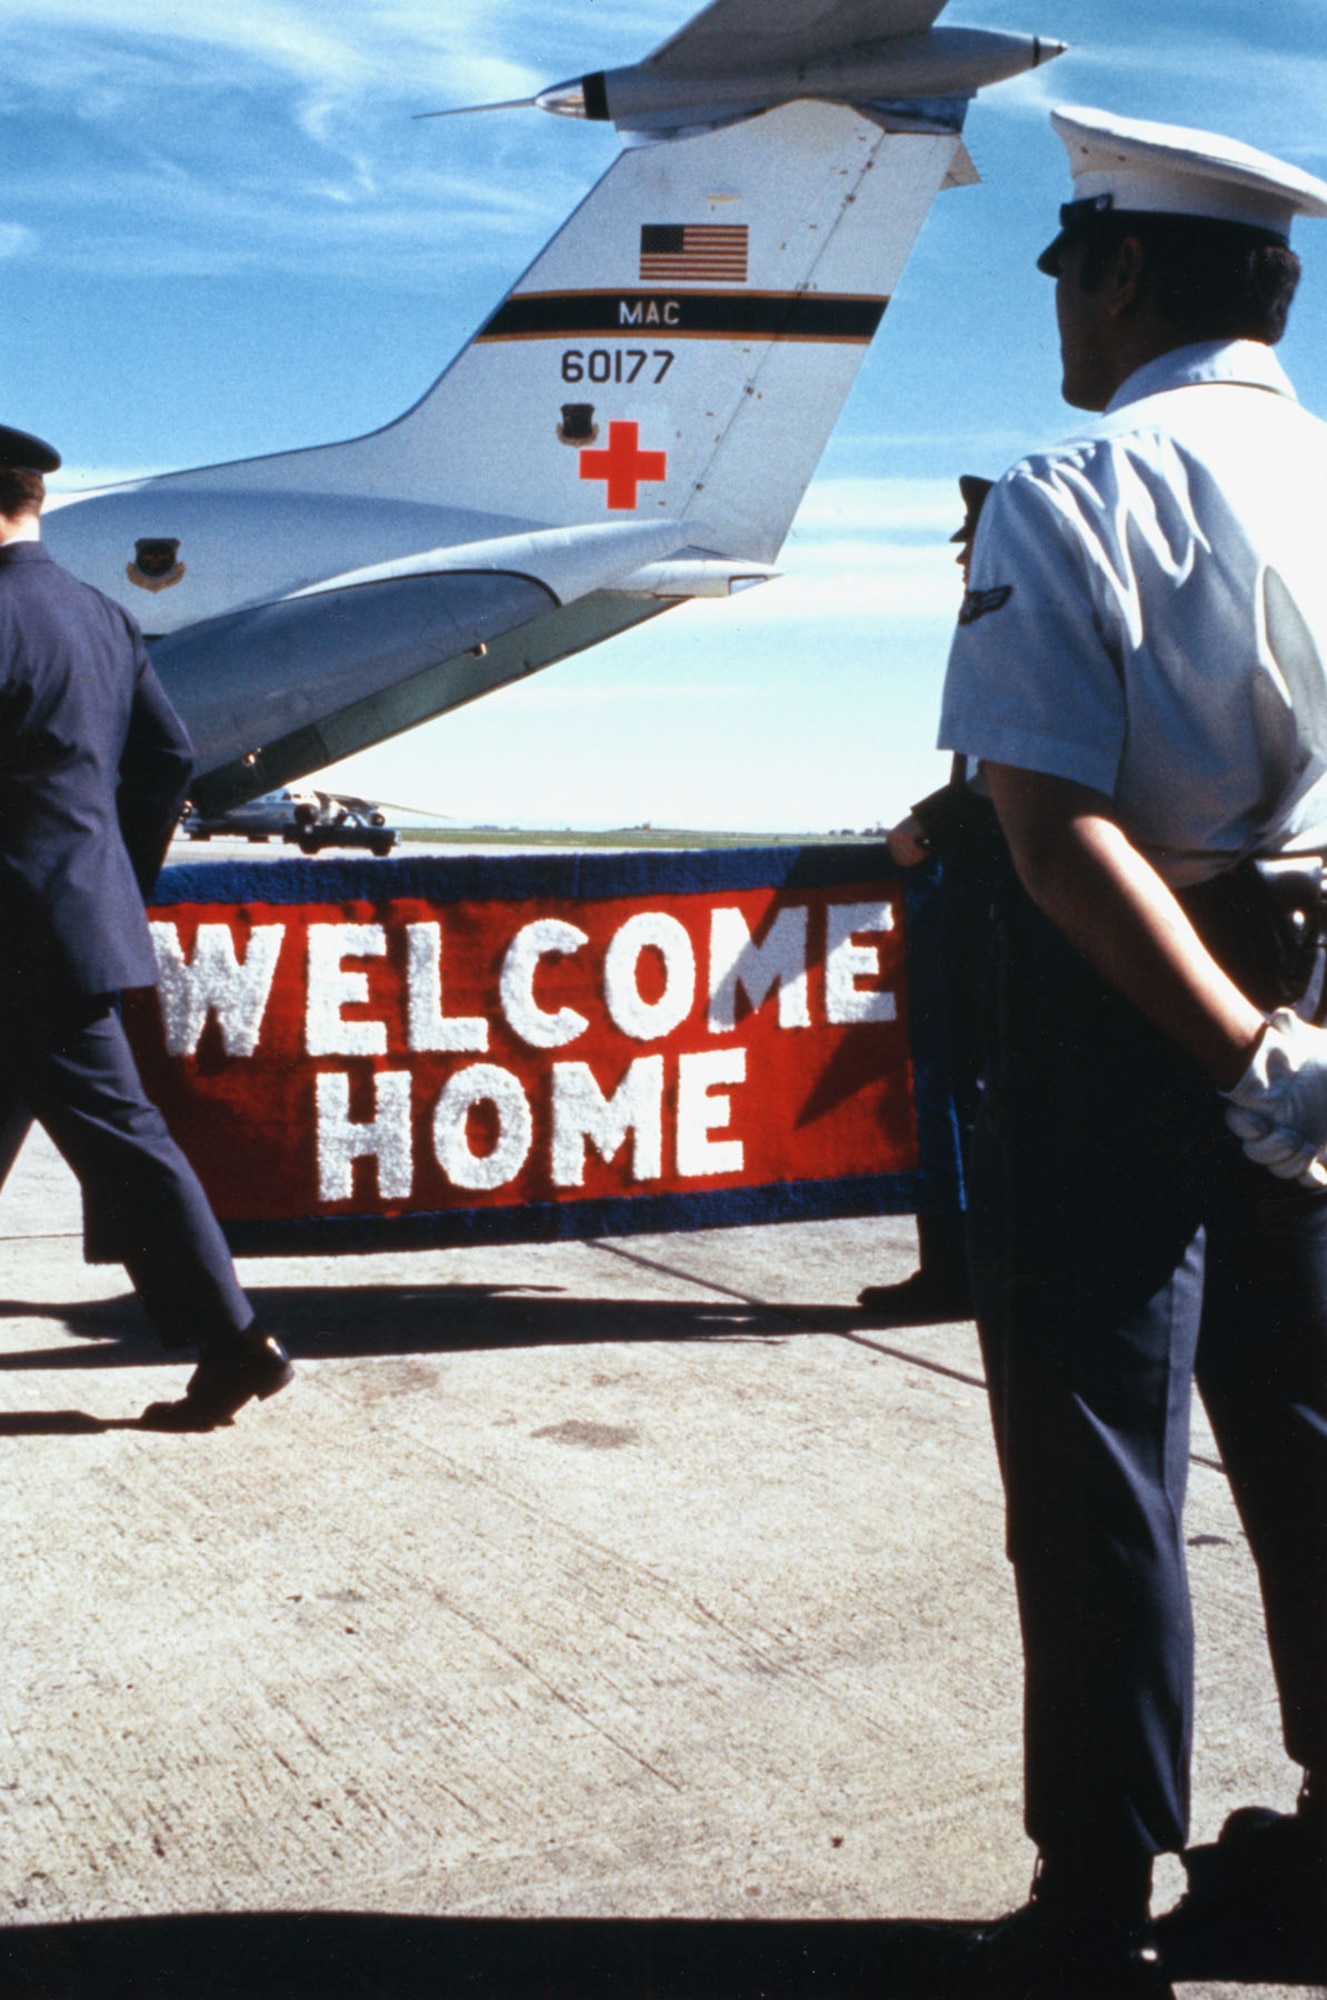 This C-141A, serial number 66-177, was the first to carry POWs home from Hanoi. The aircraft came to the National Museum of the U.S. Air Force in May 2006. The red cross was applied for OPERATION HOMECOMING to denote a peaceful mission. (U.S. Air Force photo)